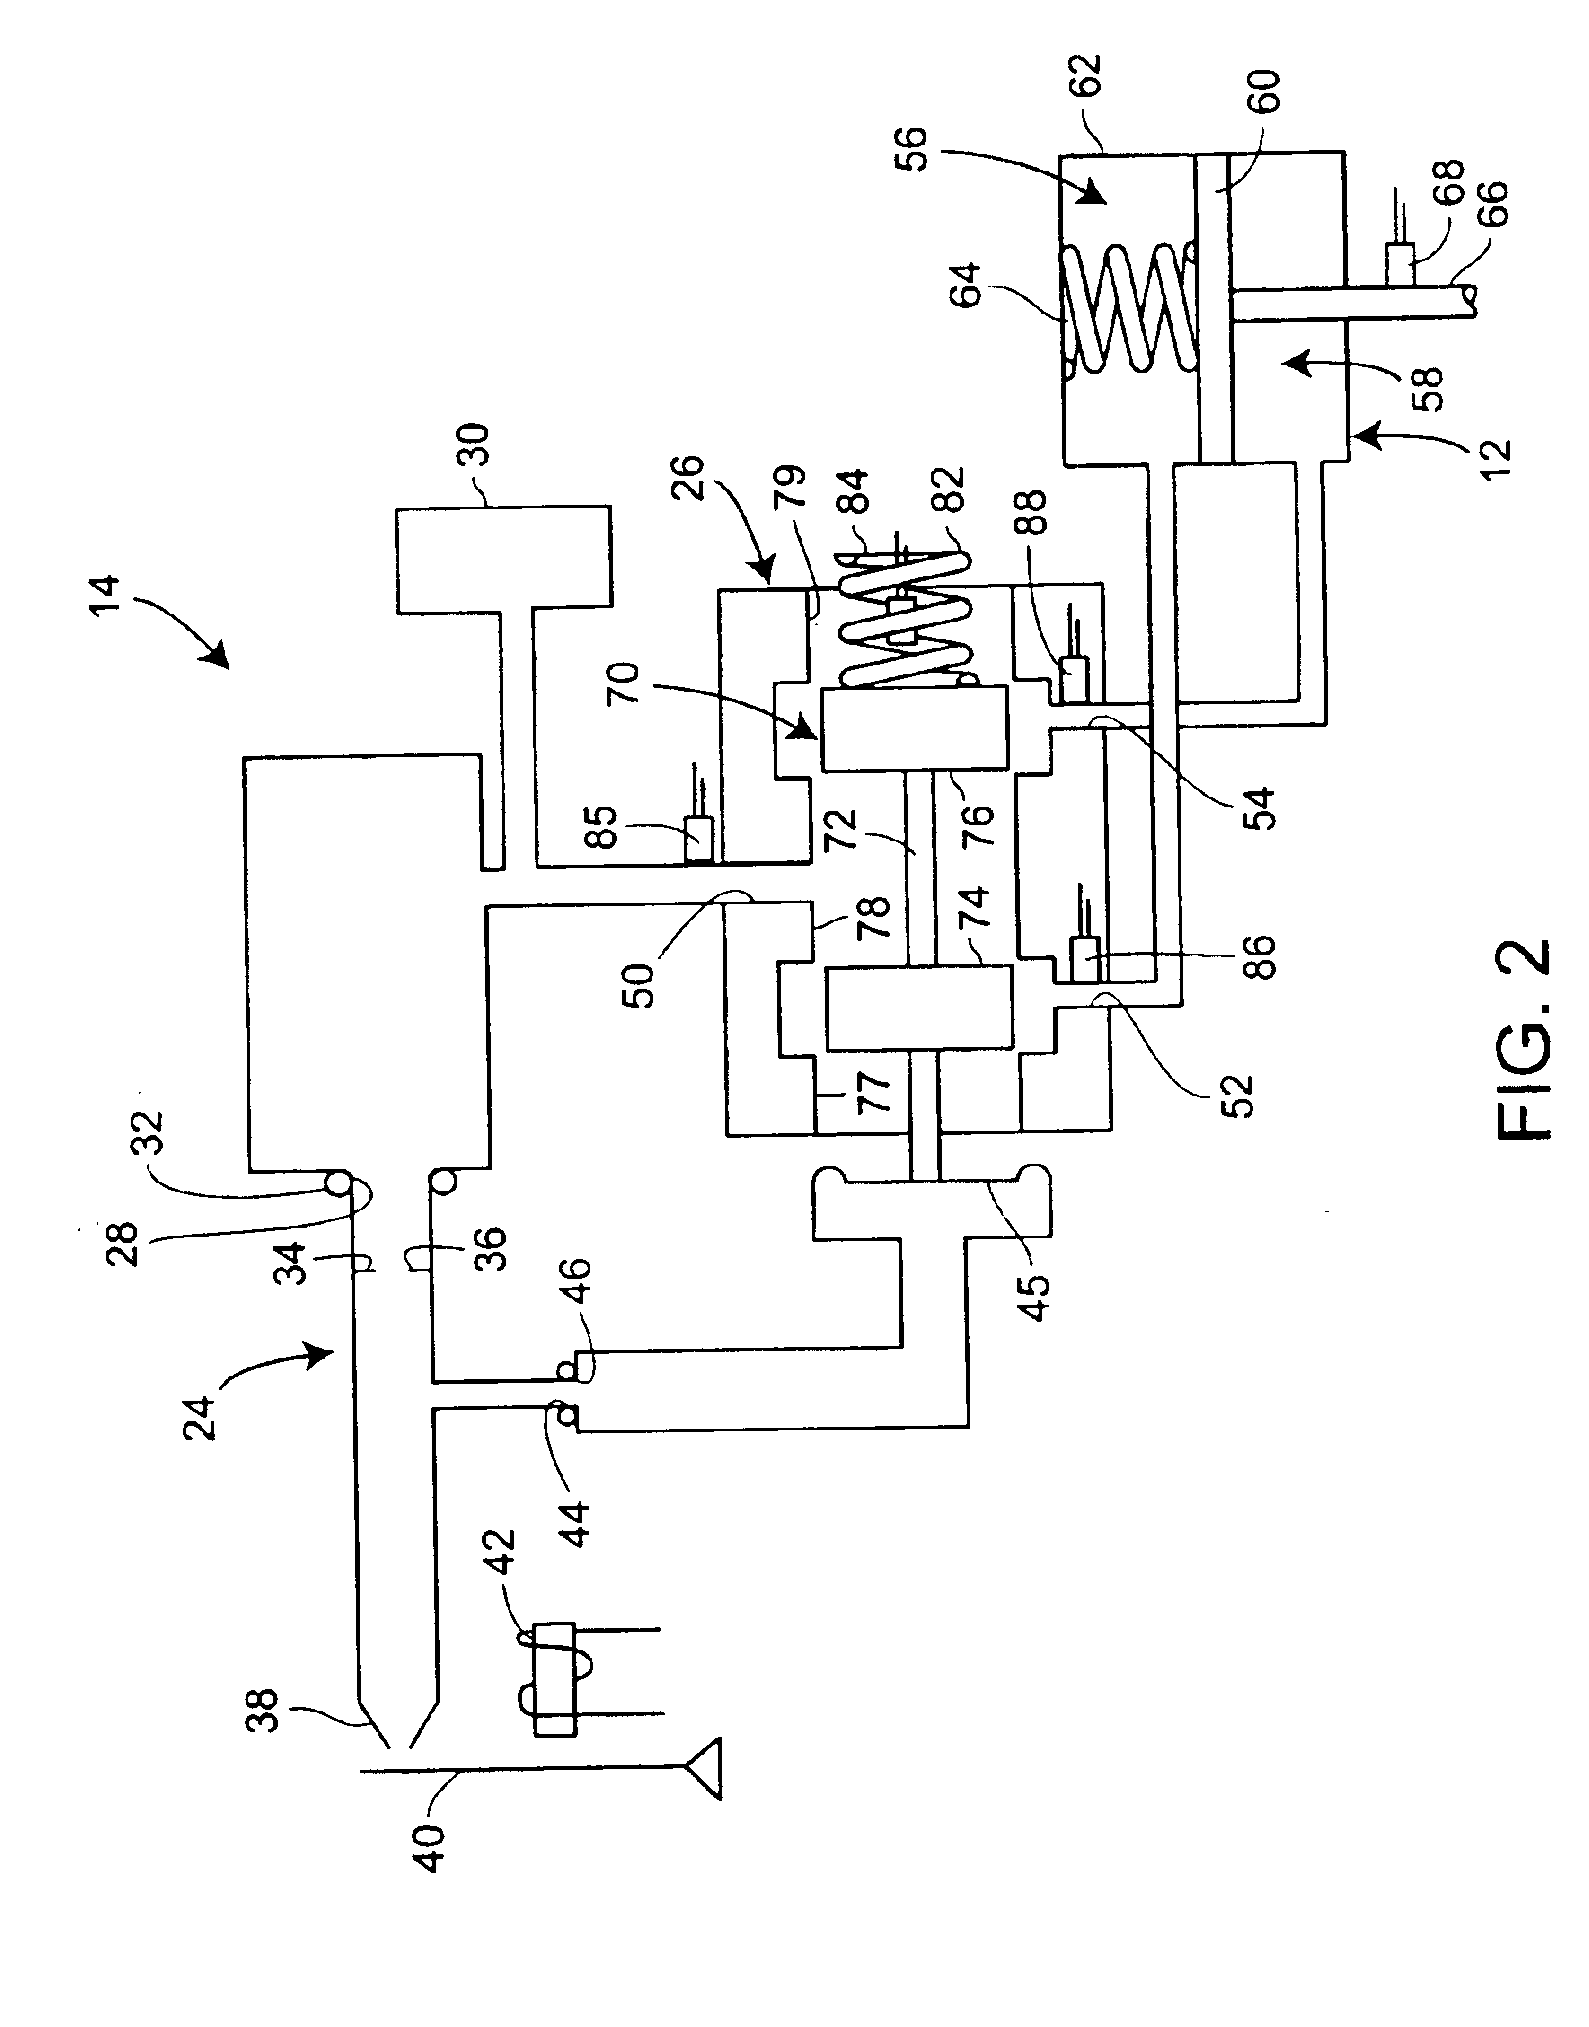 Method and apparatus for performing diagnostics in a control loop of a control valve